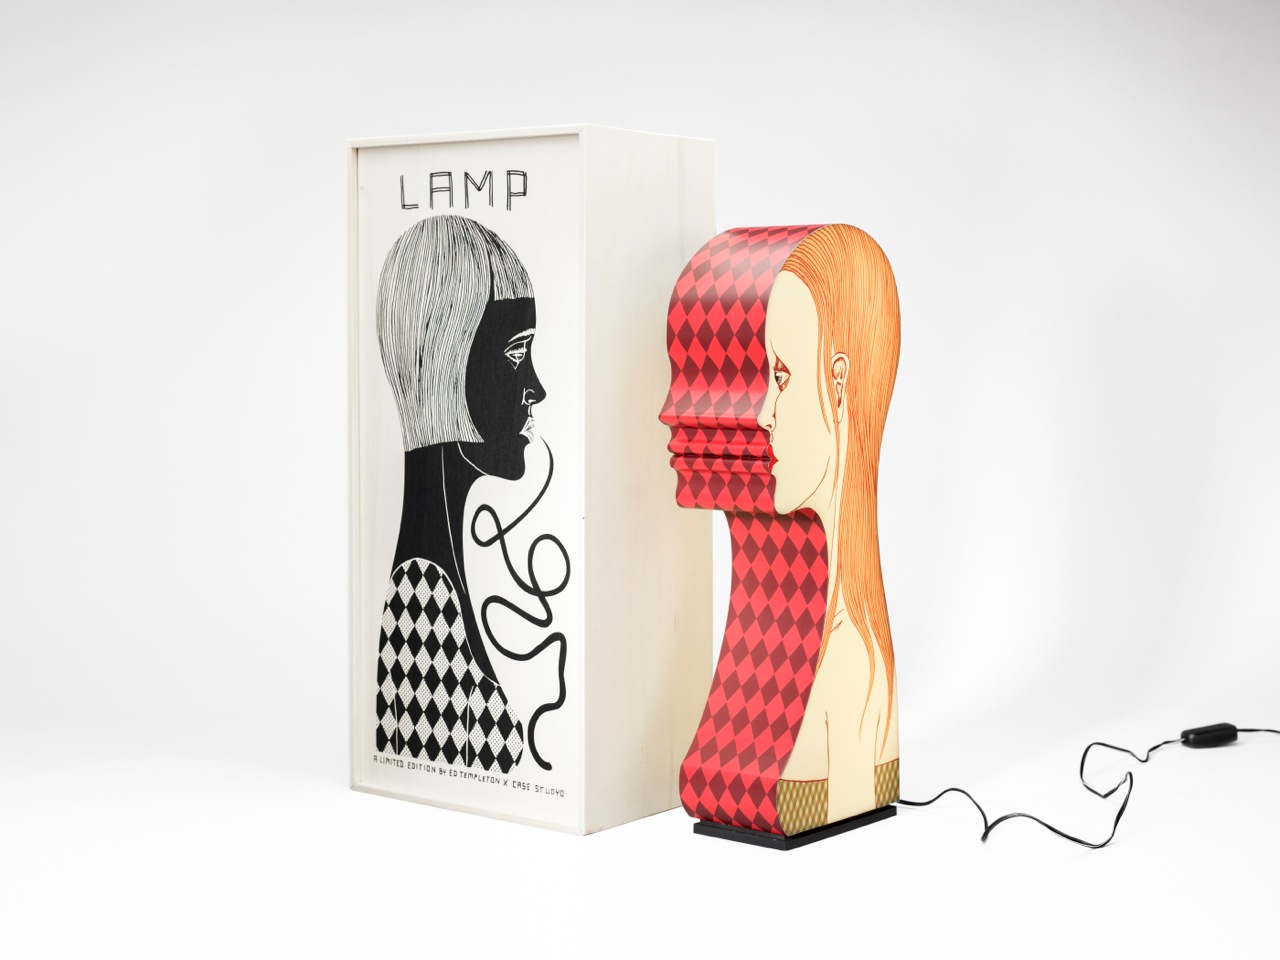 Release: Ed Templeton X Case Studyo – “LAMP” « Arrested Motion